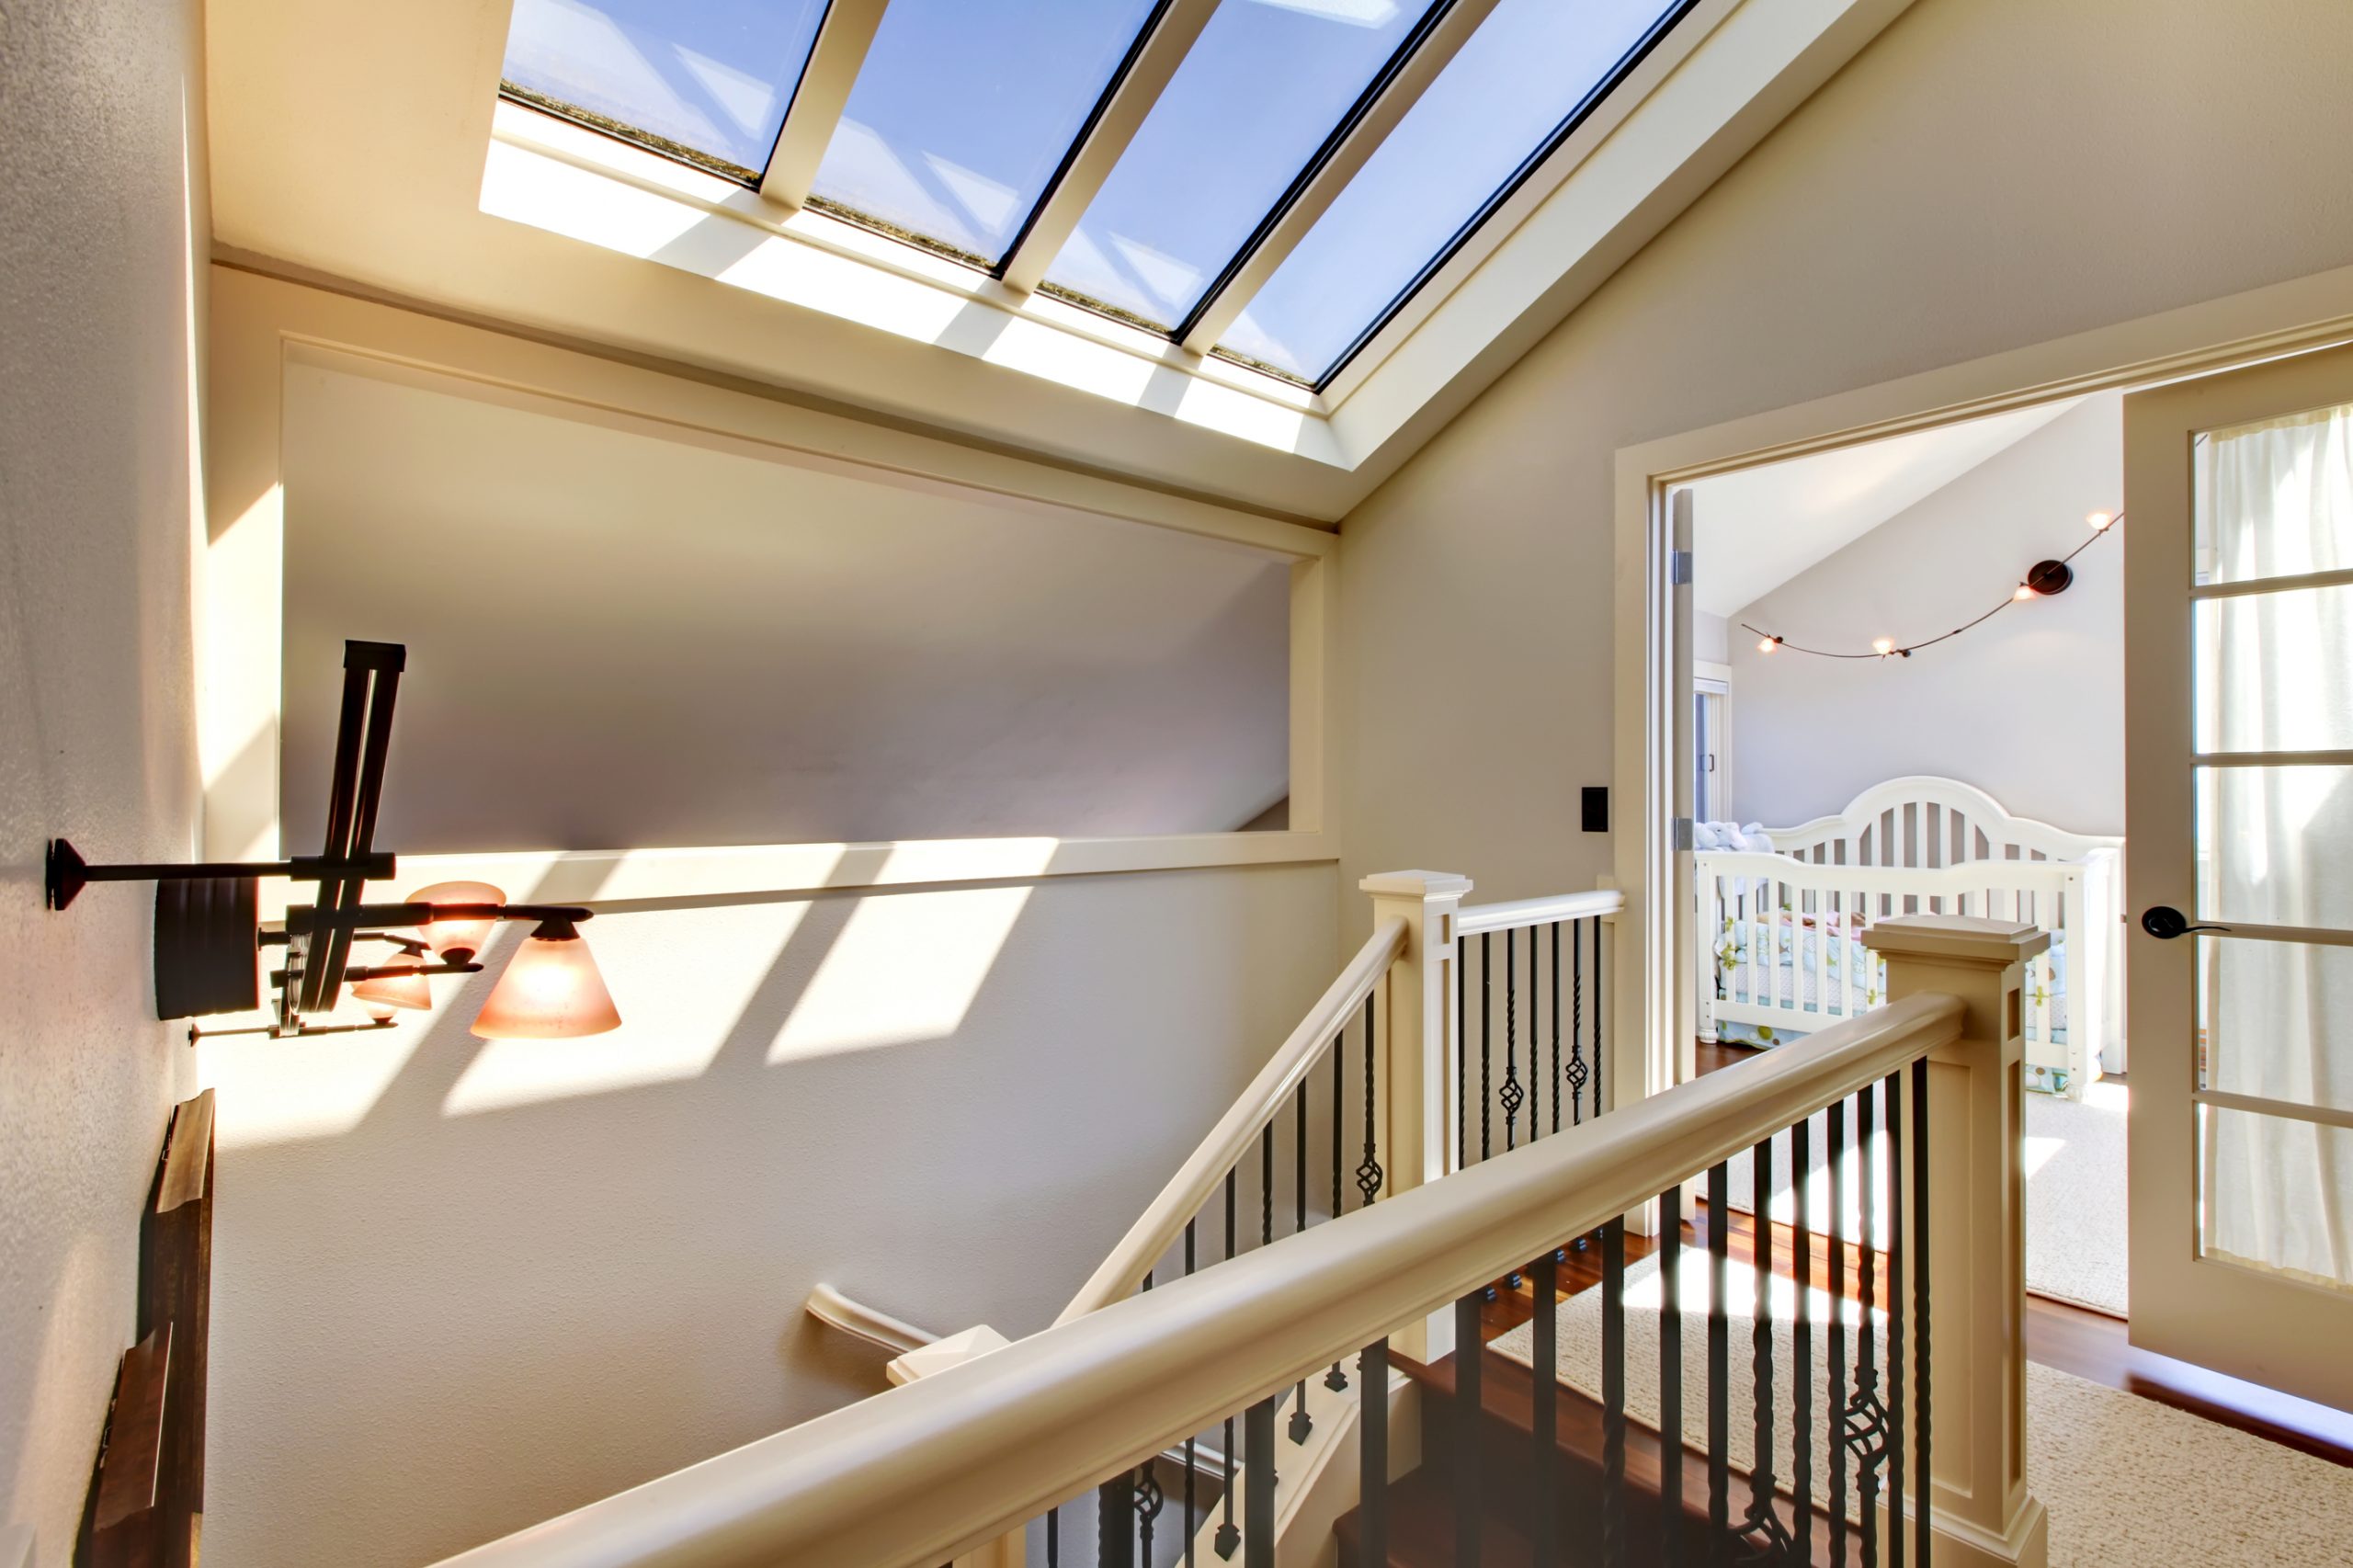 Skylights: 4 Important Things to Know When Buying Them